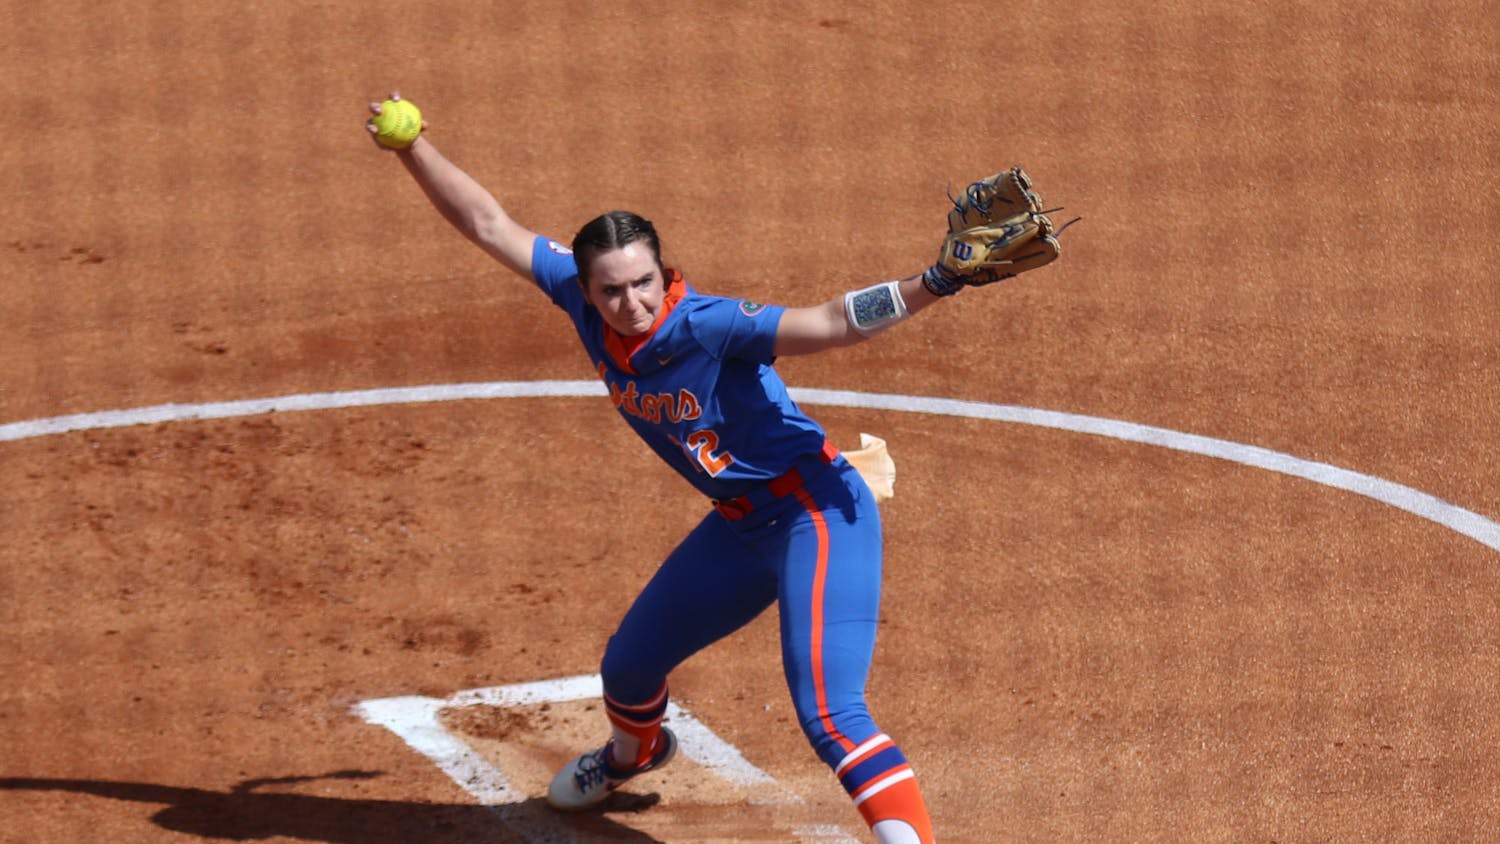 Senior right-handed pitcher Elizabeth Hightower delivers a pitch against Louisville, 2021.